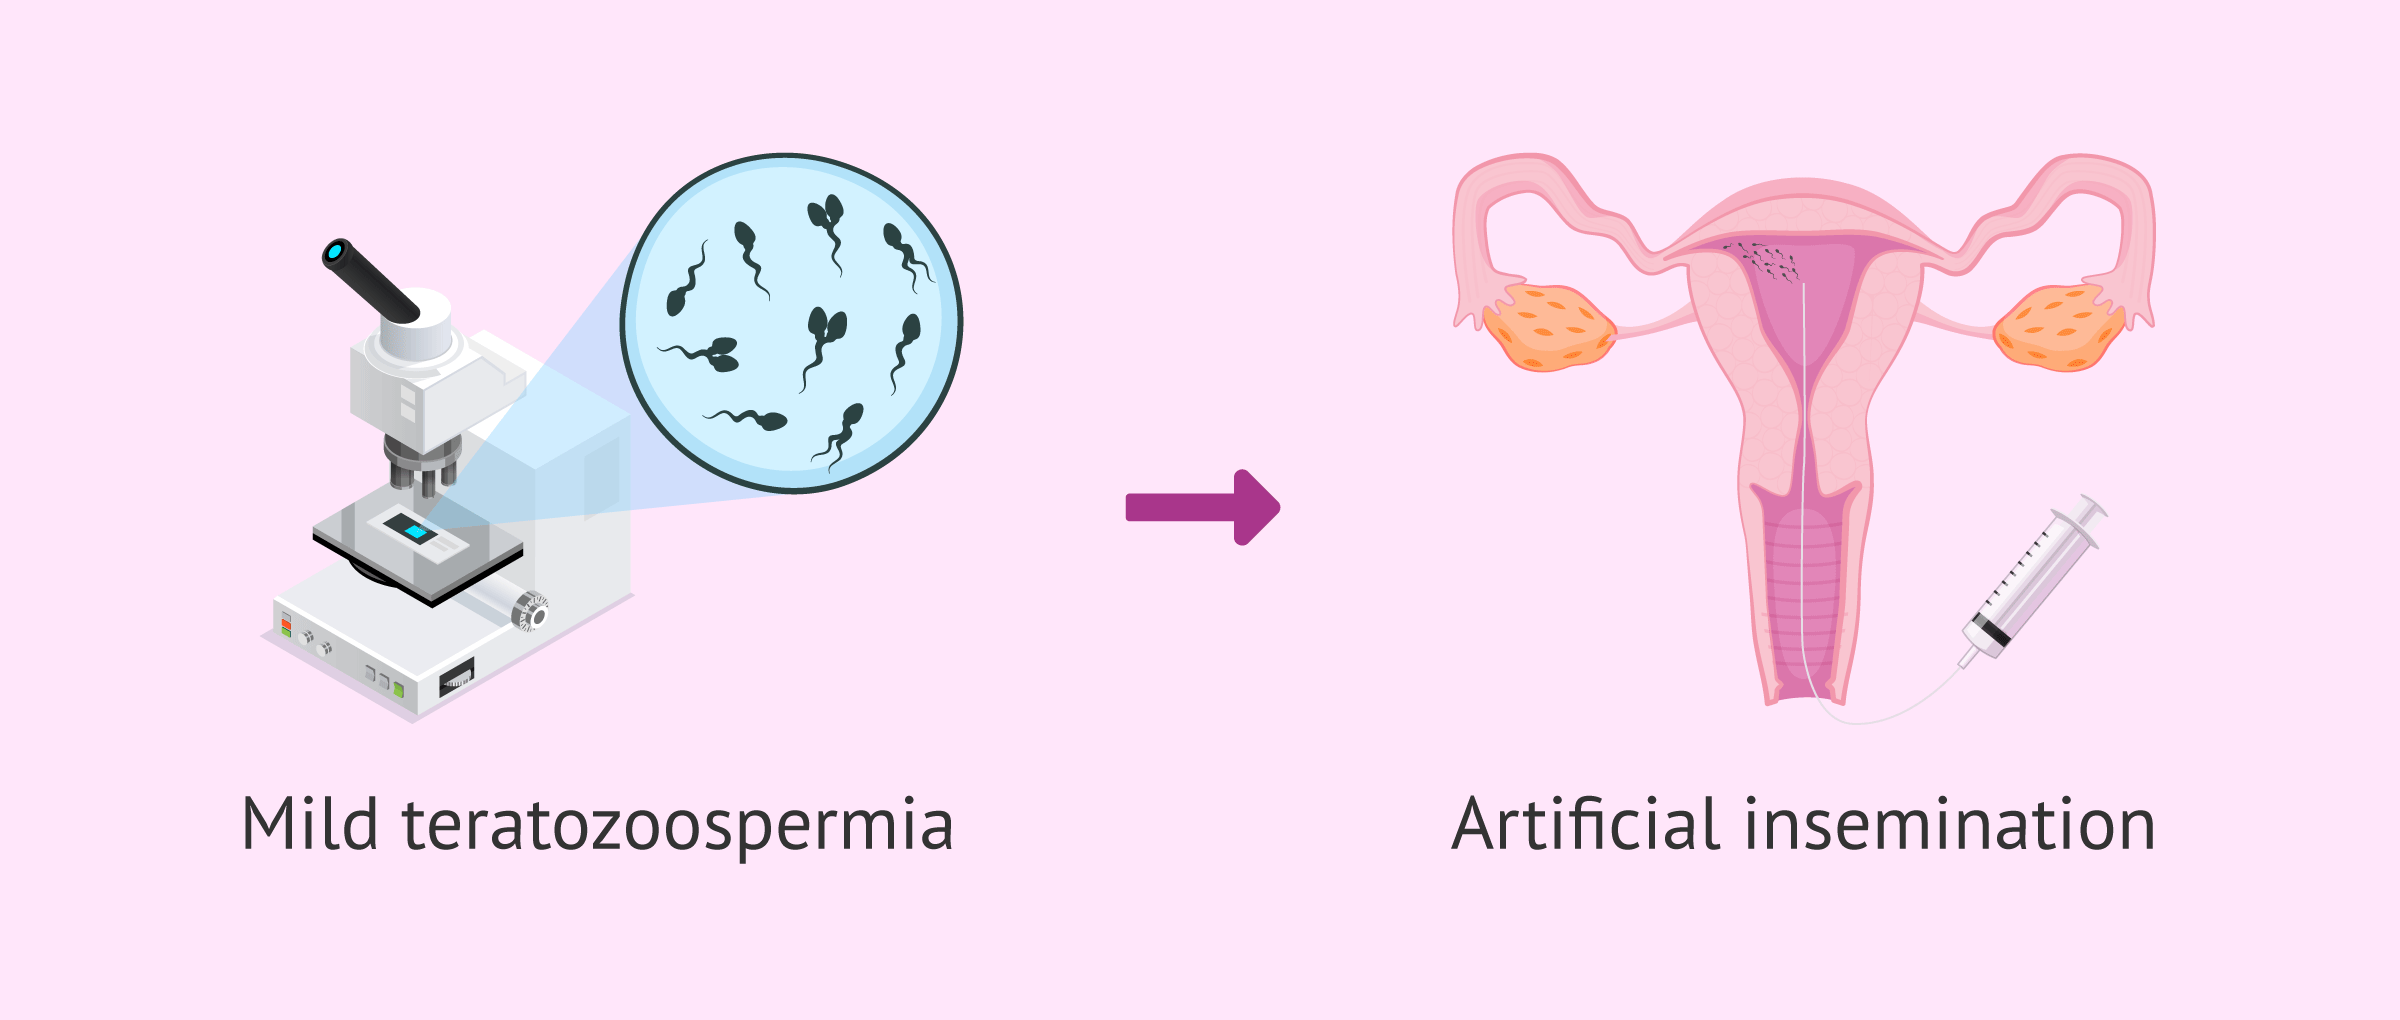 AI for patients with teratozoospermia